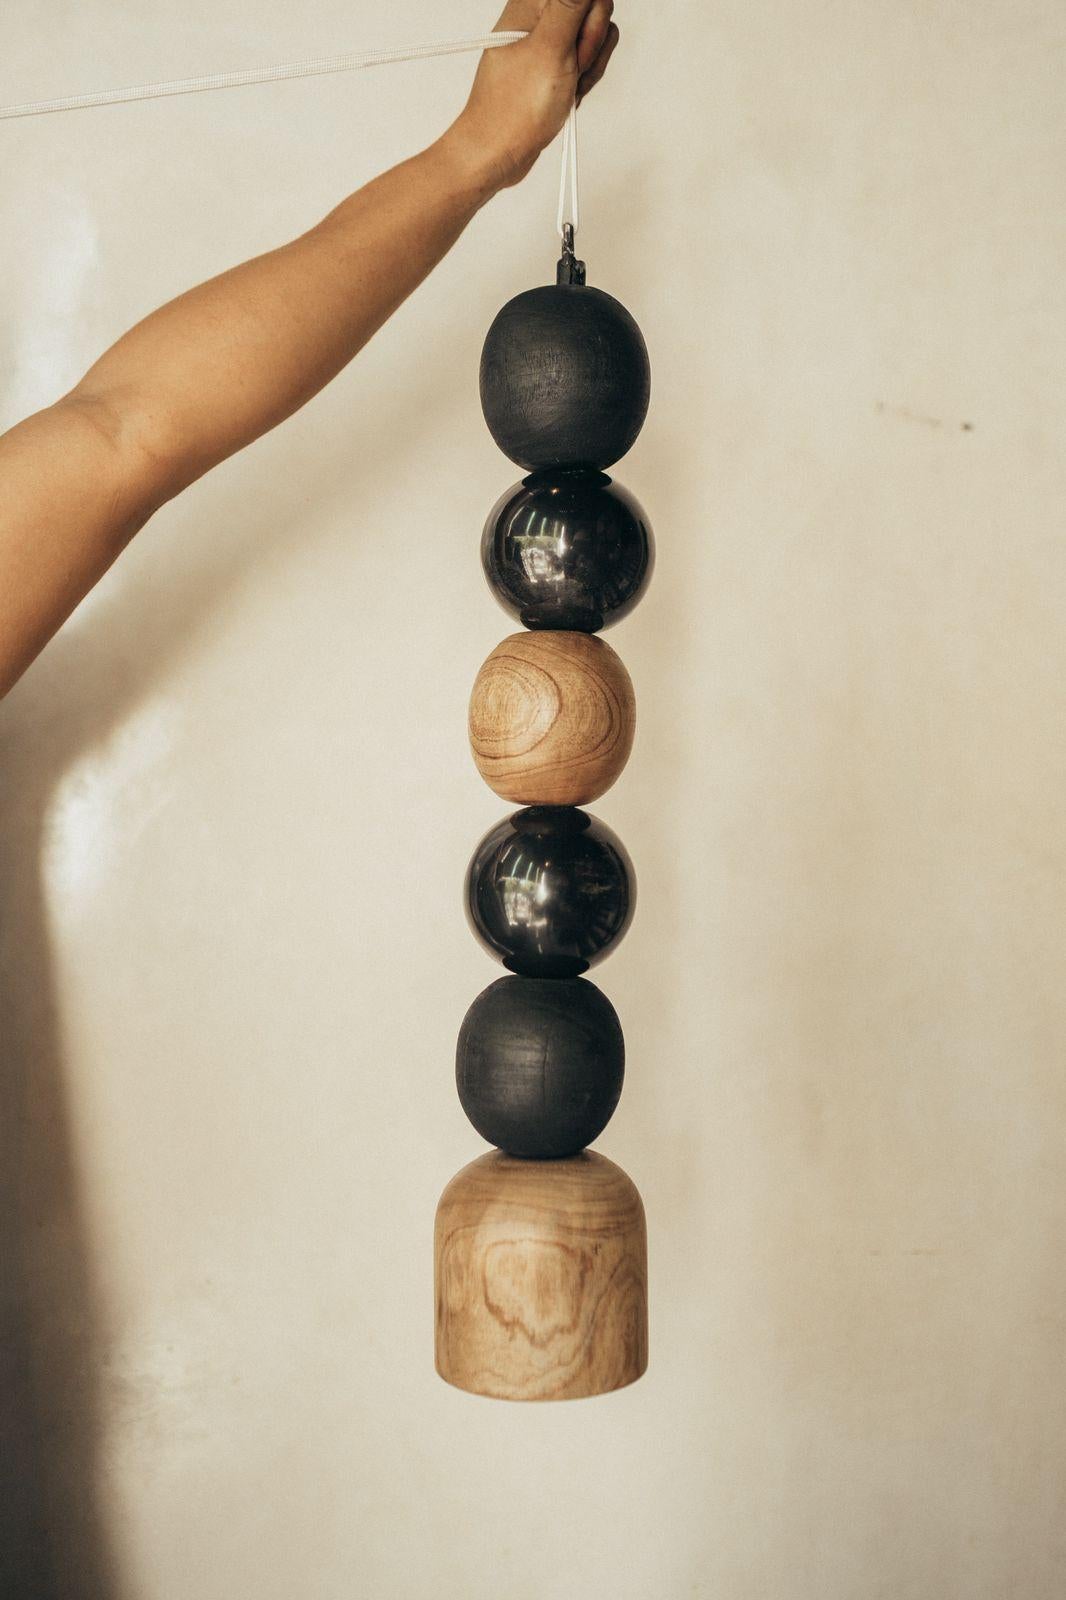 Pendant lamp of wooden, burned, natural and black marble balls by Daniel Orozco
Dimensions: D 13 x H 65 cm
Materials: Wood, Marble

All our lamps can be wired according to each country. If sold to the USA it will be wired for the USA for